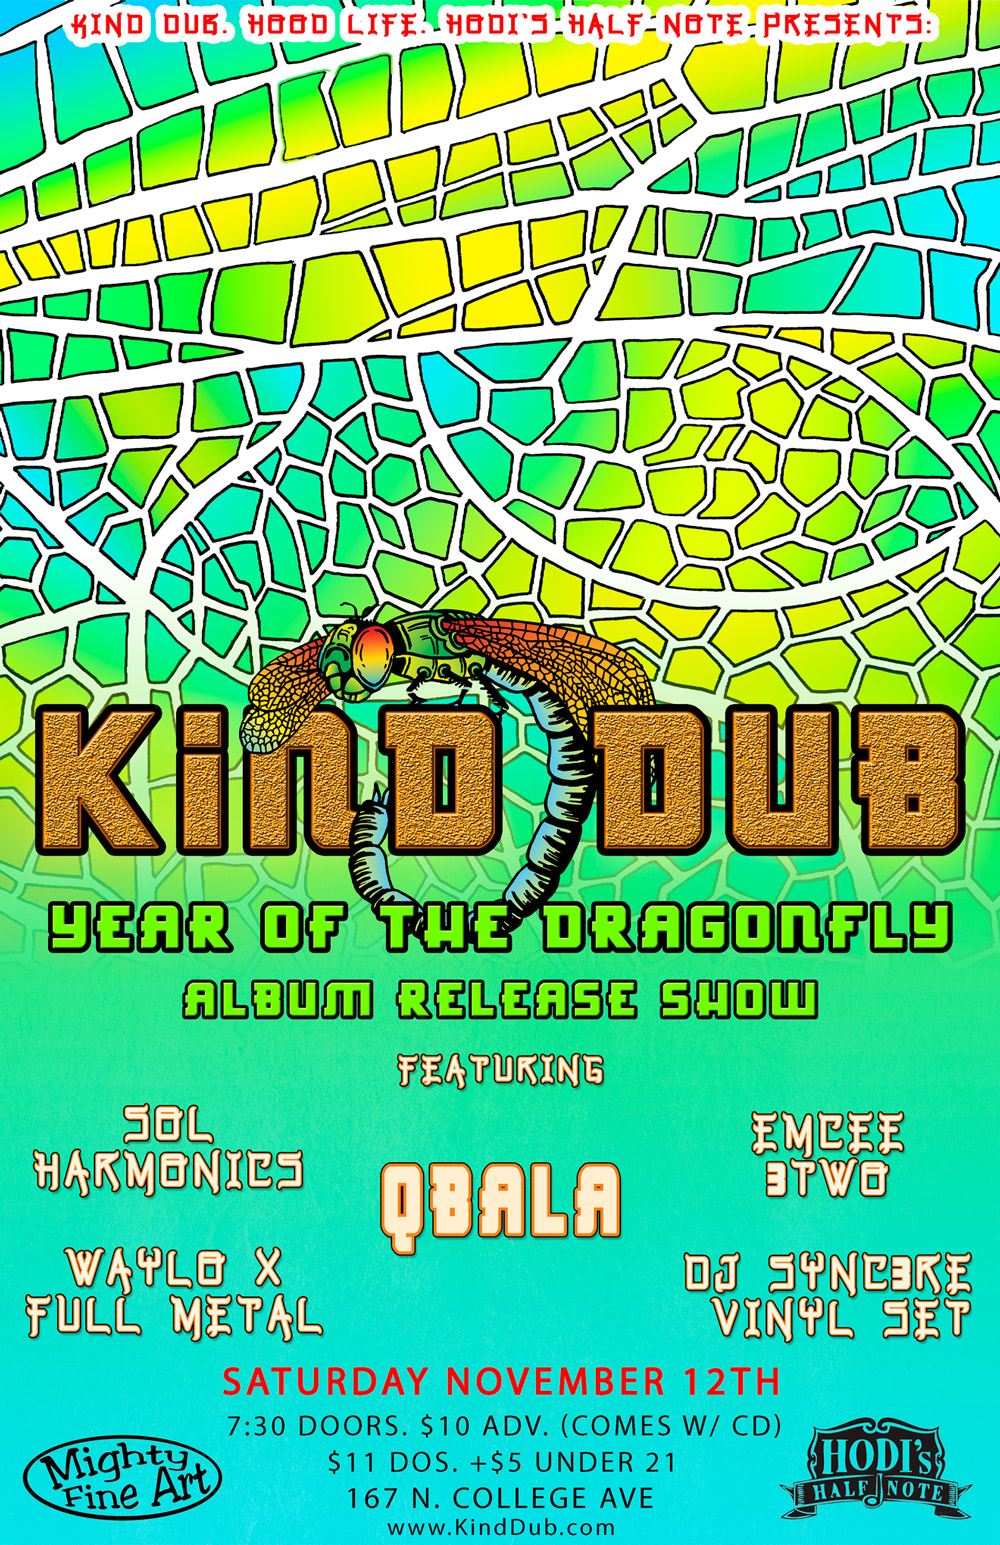 Kind-Dub-Year-Of-The-Dragonfly-Release-Poster-web